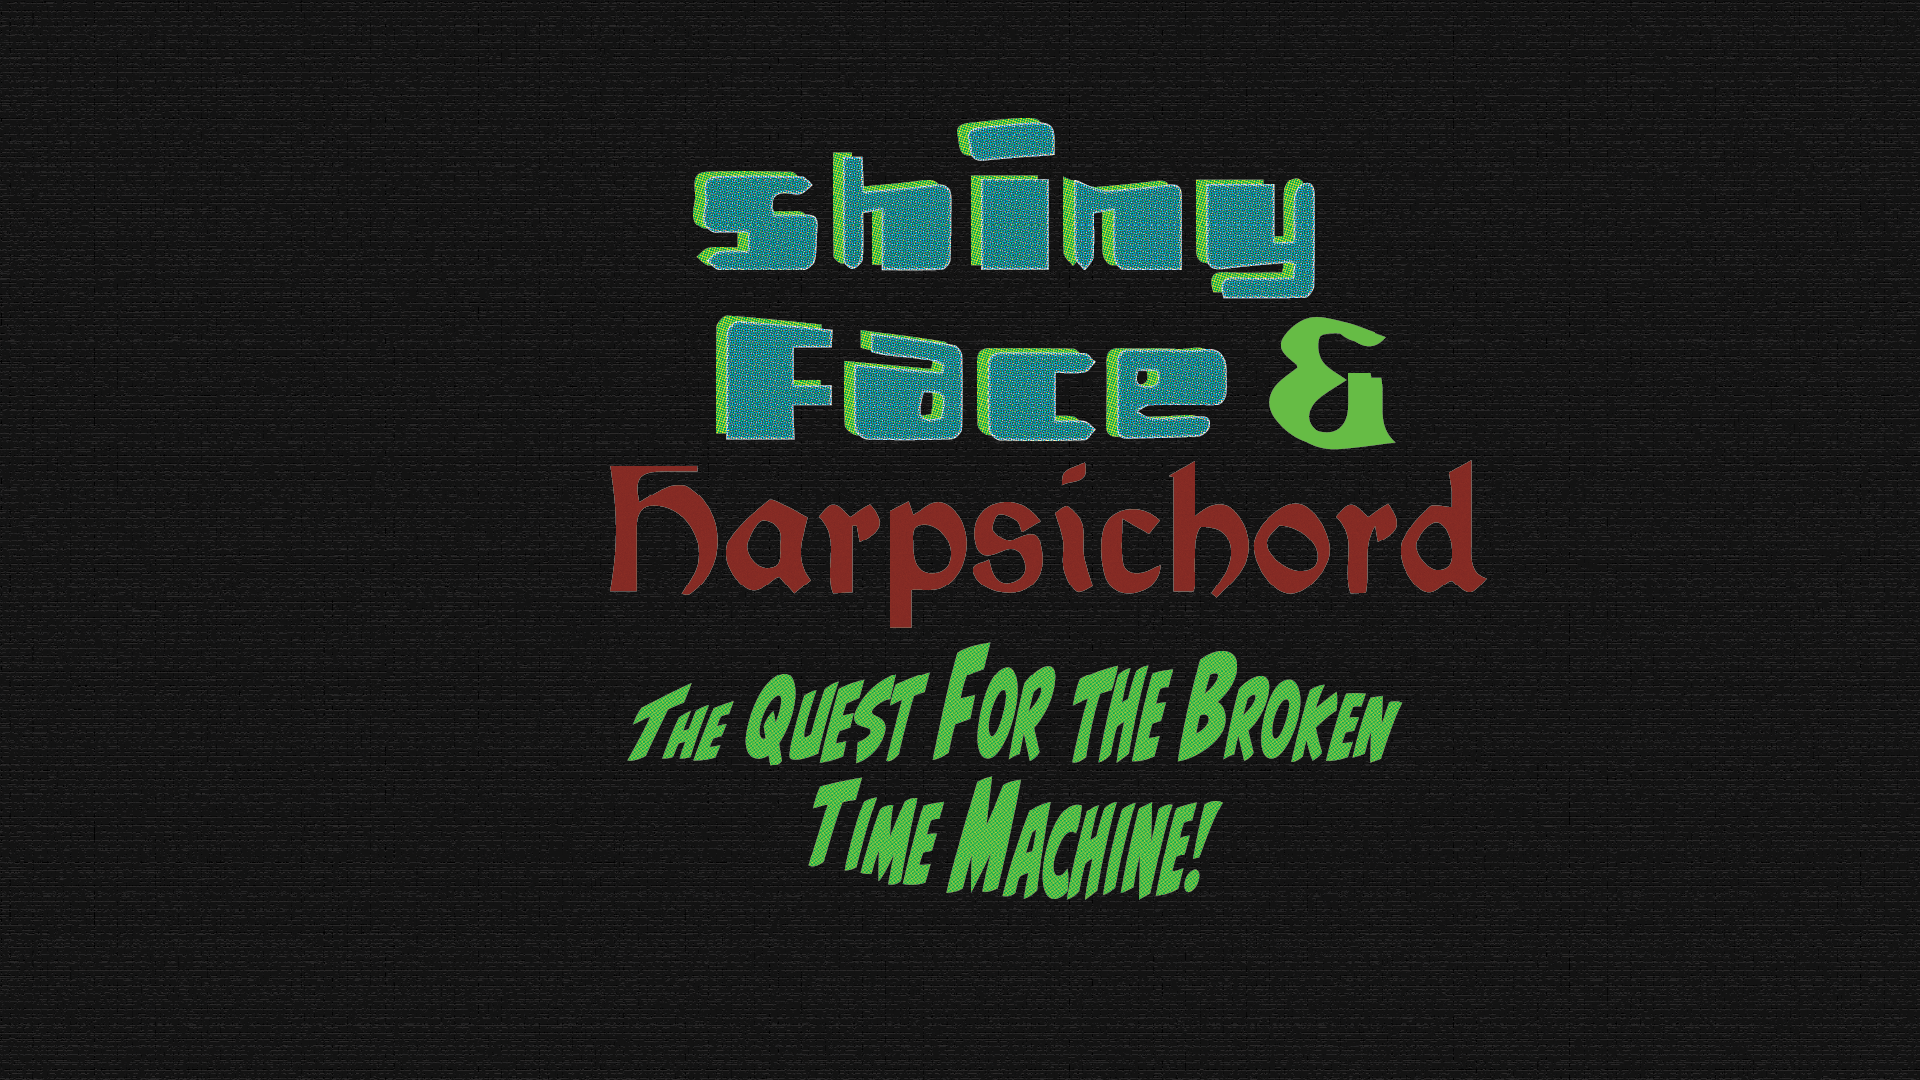 Shiny Face and Harpsichord: The Quest for the Broken Time Machine